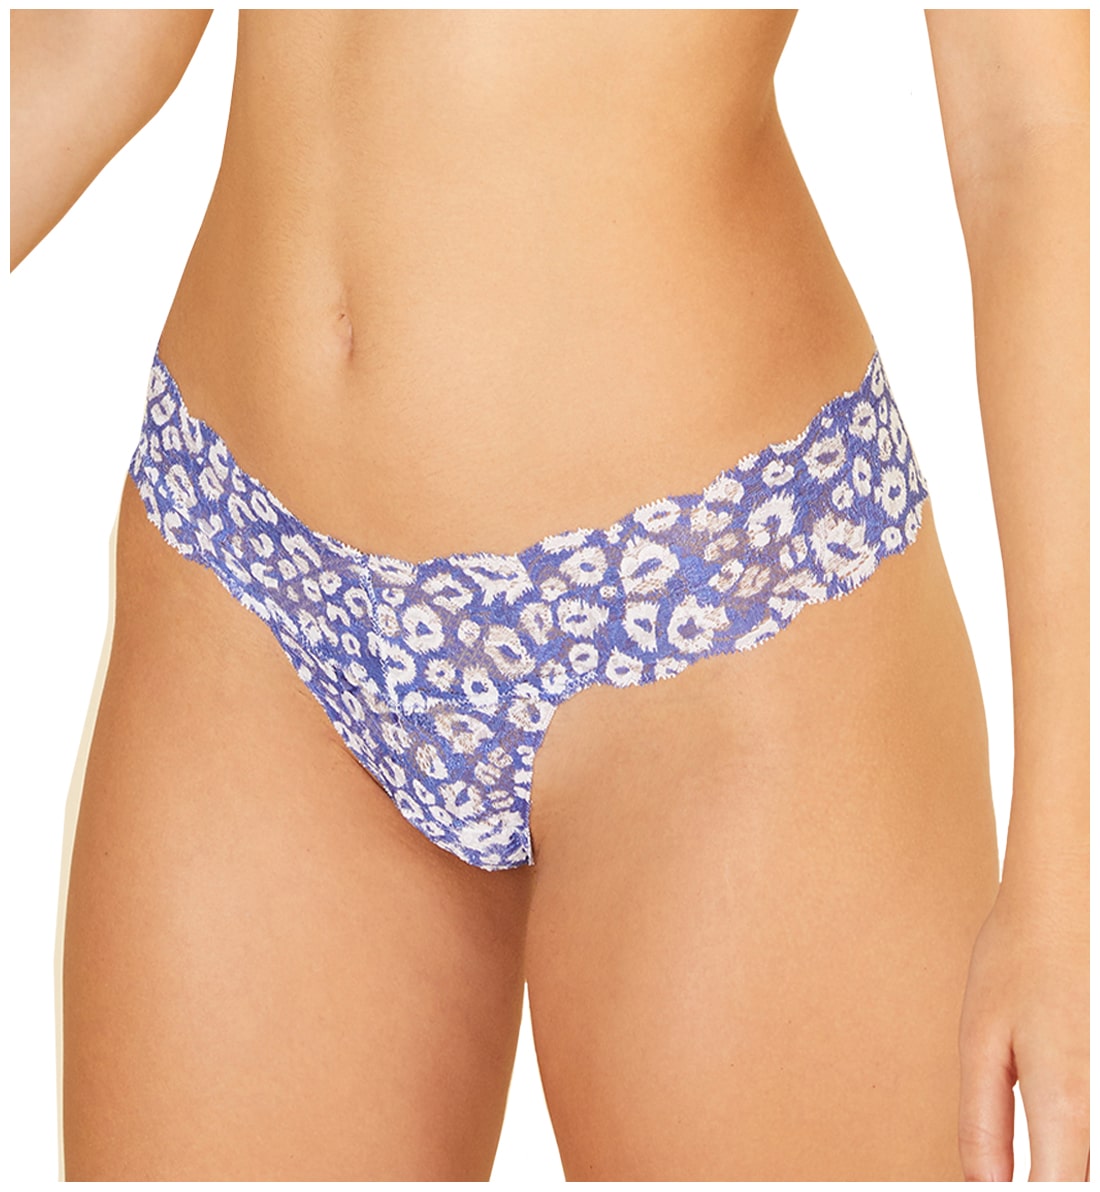 Cosabella Never Say Never Printed Cutie Thong (NEVEP0321),Leopard Cielo - Leopard Cielo,One Size